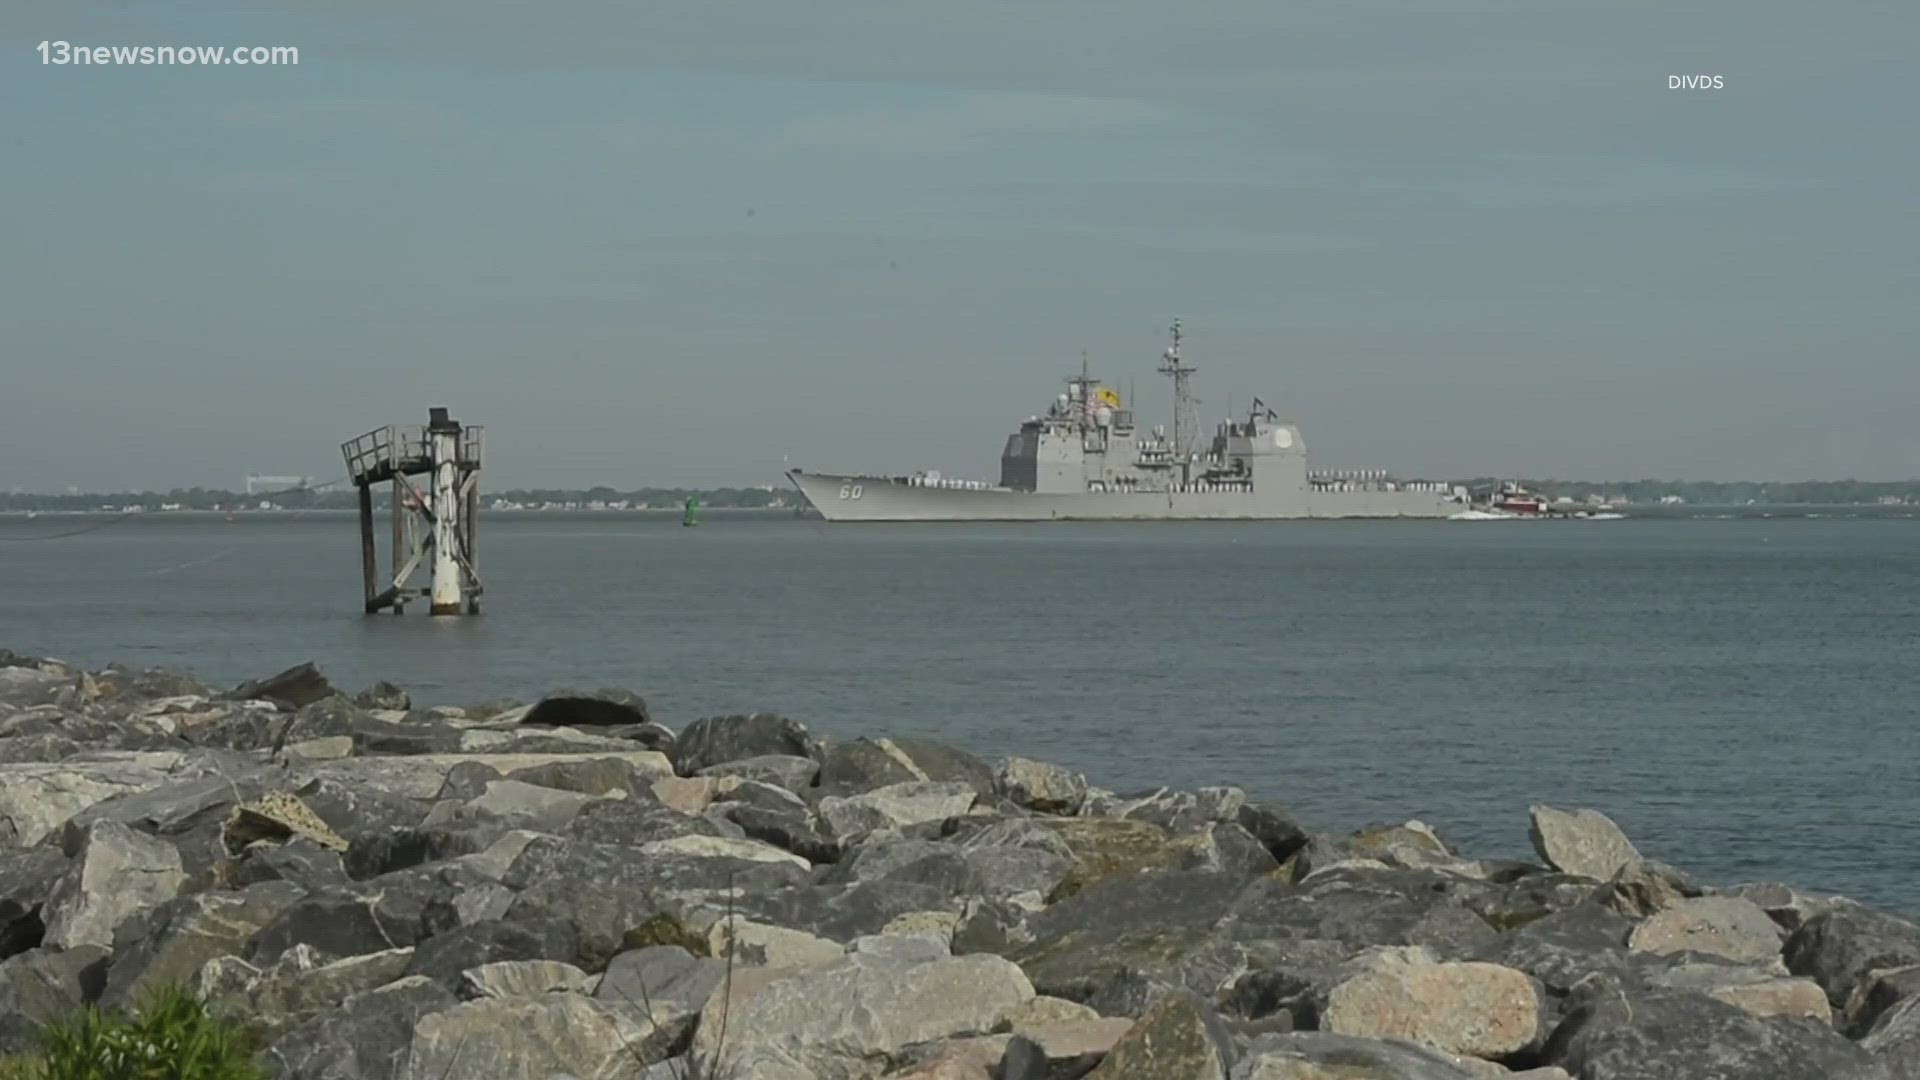 The USS Normandy is returning to Naval Station Norfolk on Saturday, the last ship of Gerald R. Ford Carrier Strike Group to come home after a long deployment.